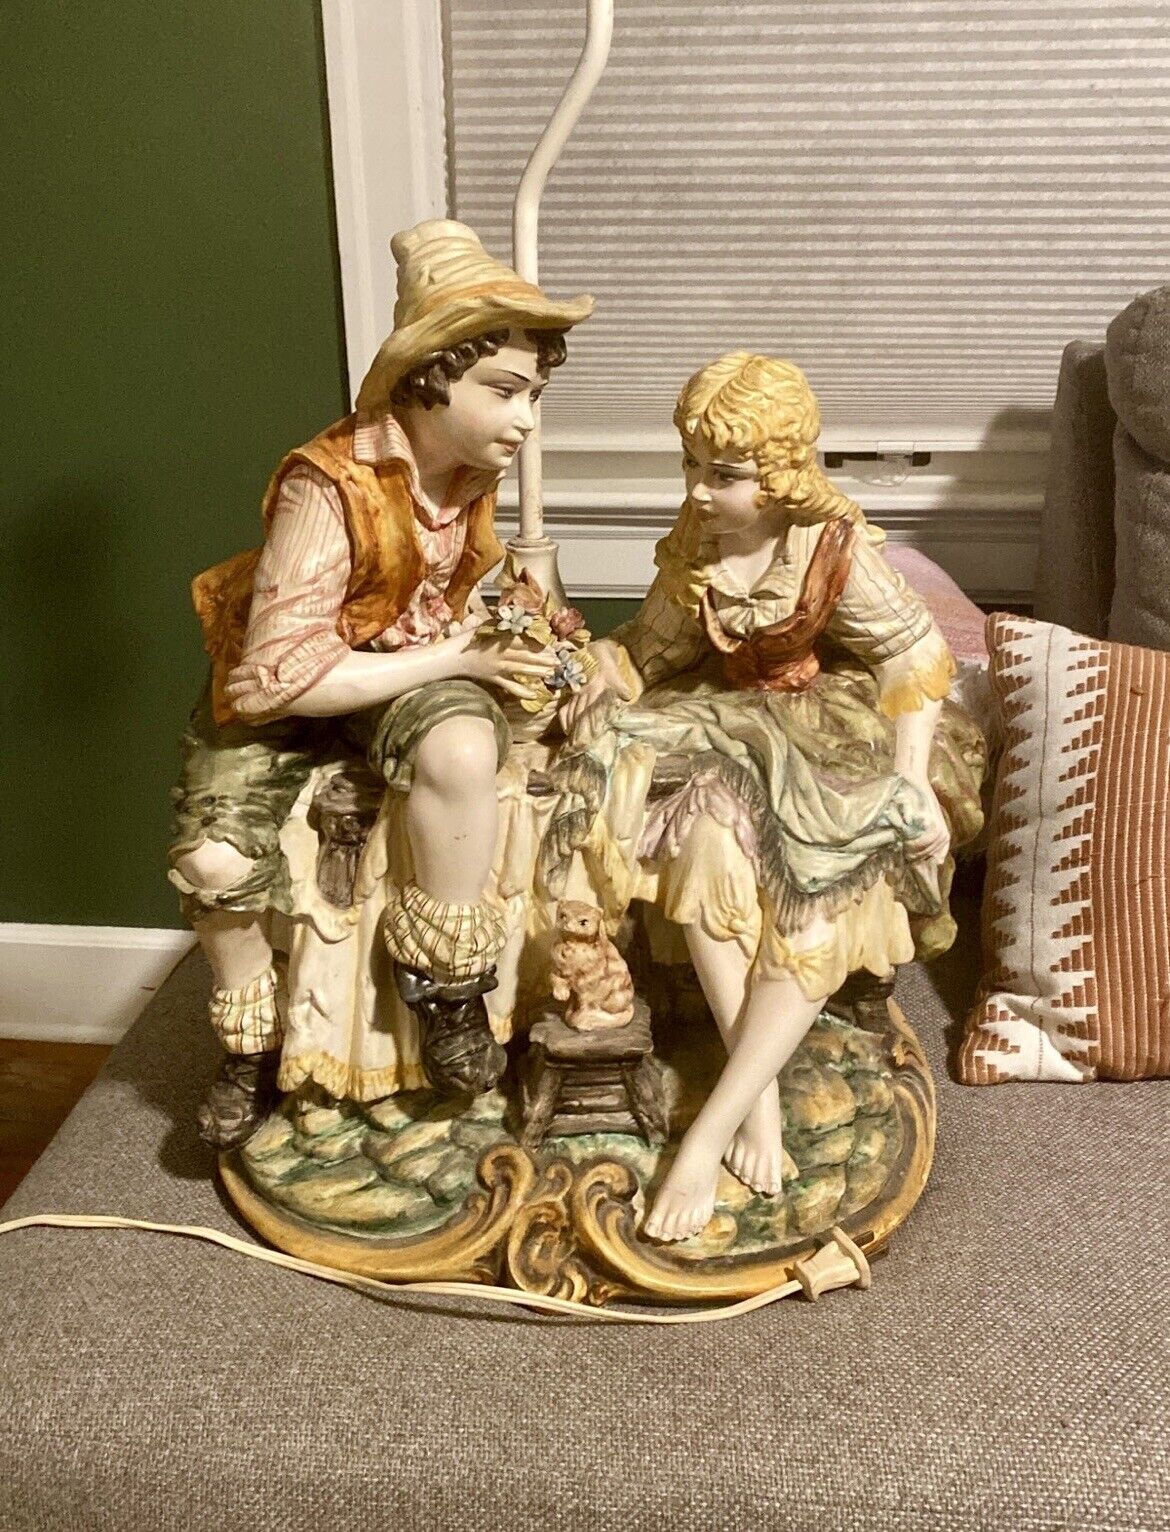 VINTAGE CAPODIMONTE TABLE LAMP Boy & Girl With Flowers And Kitten - No Shade 60s